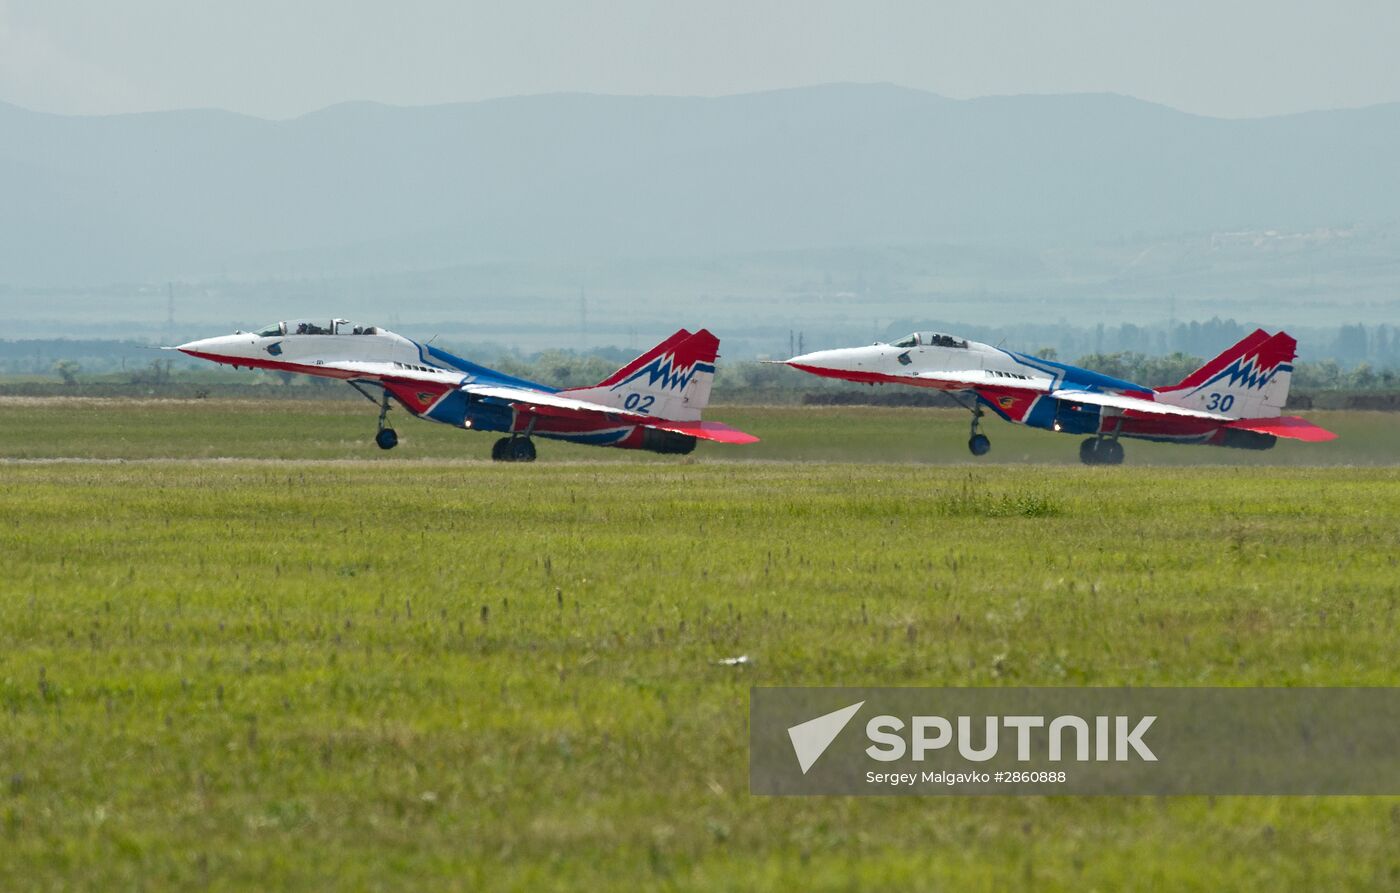 Preparations for Aviadarts-2016 National Competitions of Military Pilots in Crimea